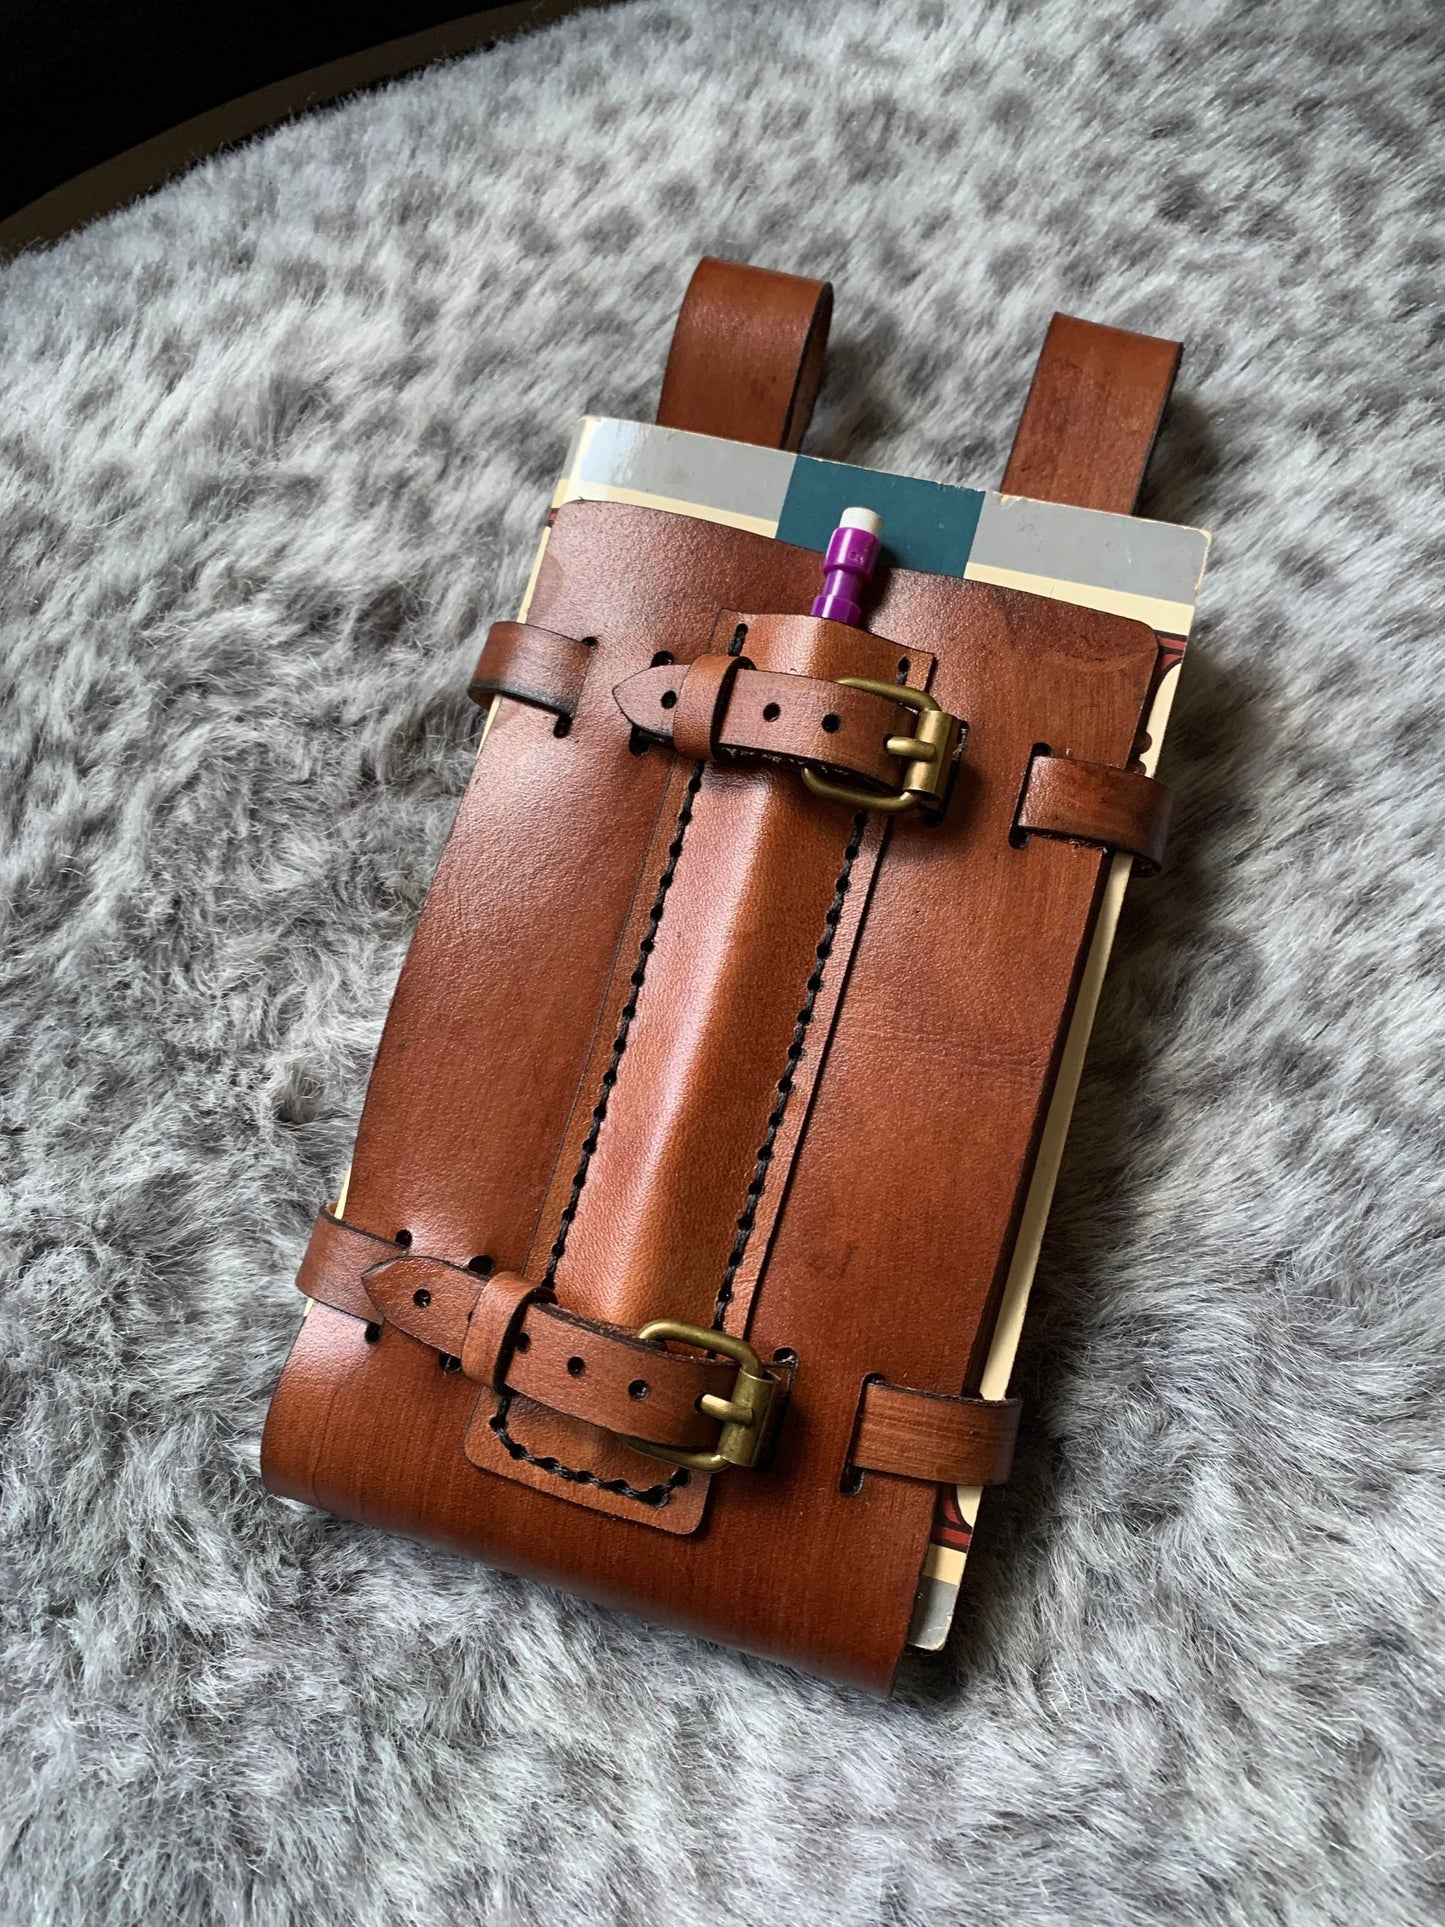 Book Holster with belt loops for Ren Faire, LARP, Cosplay